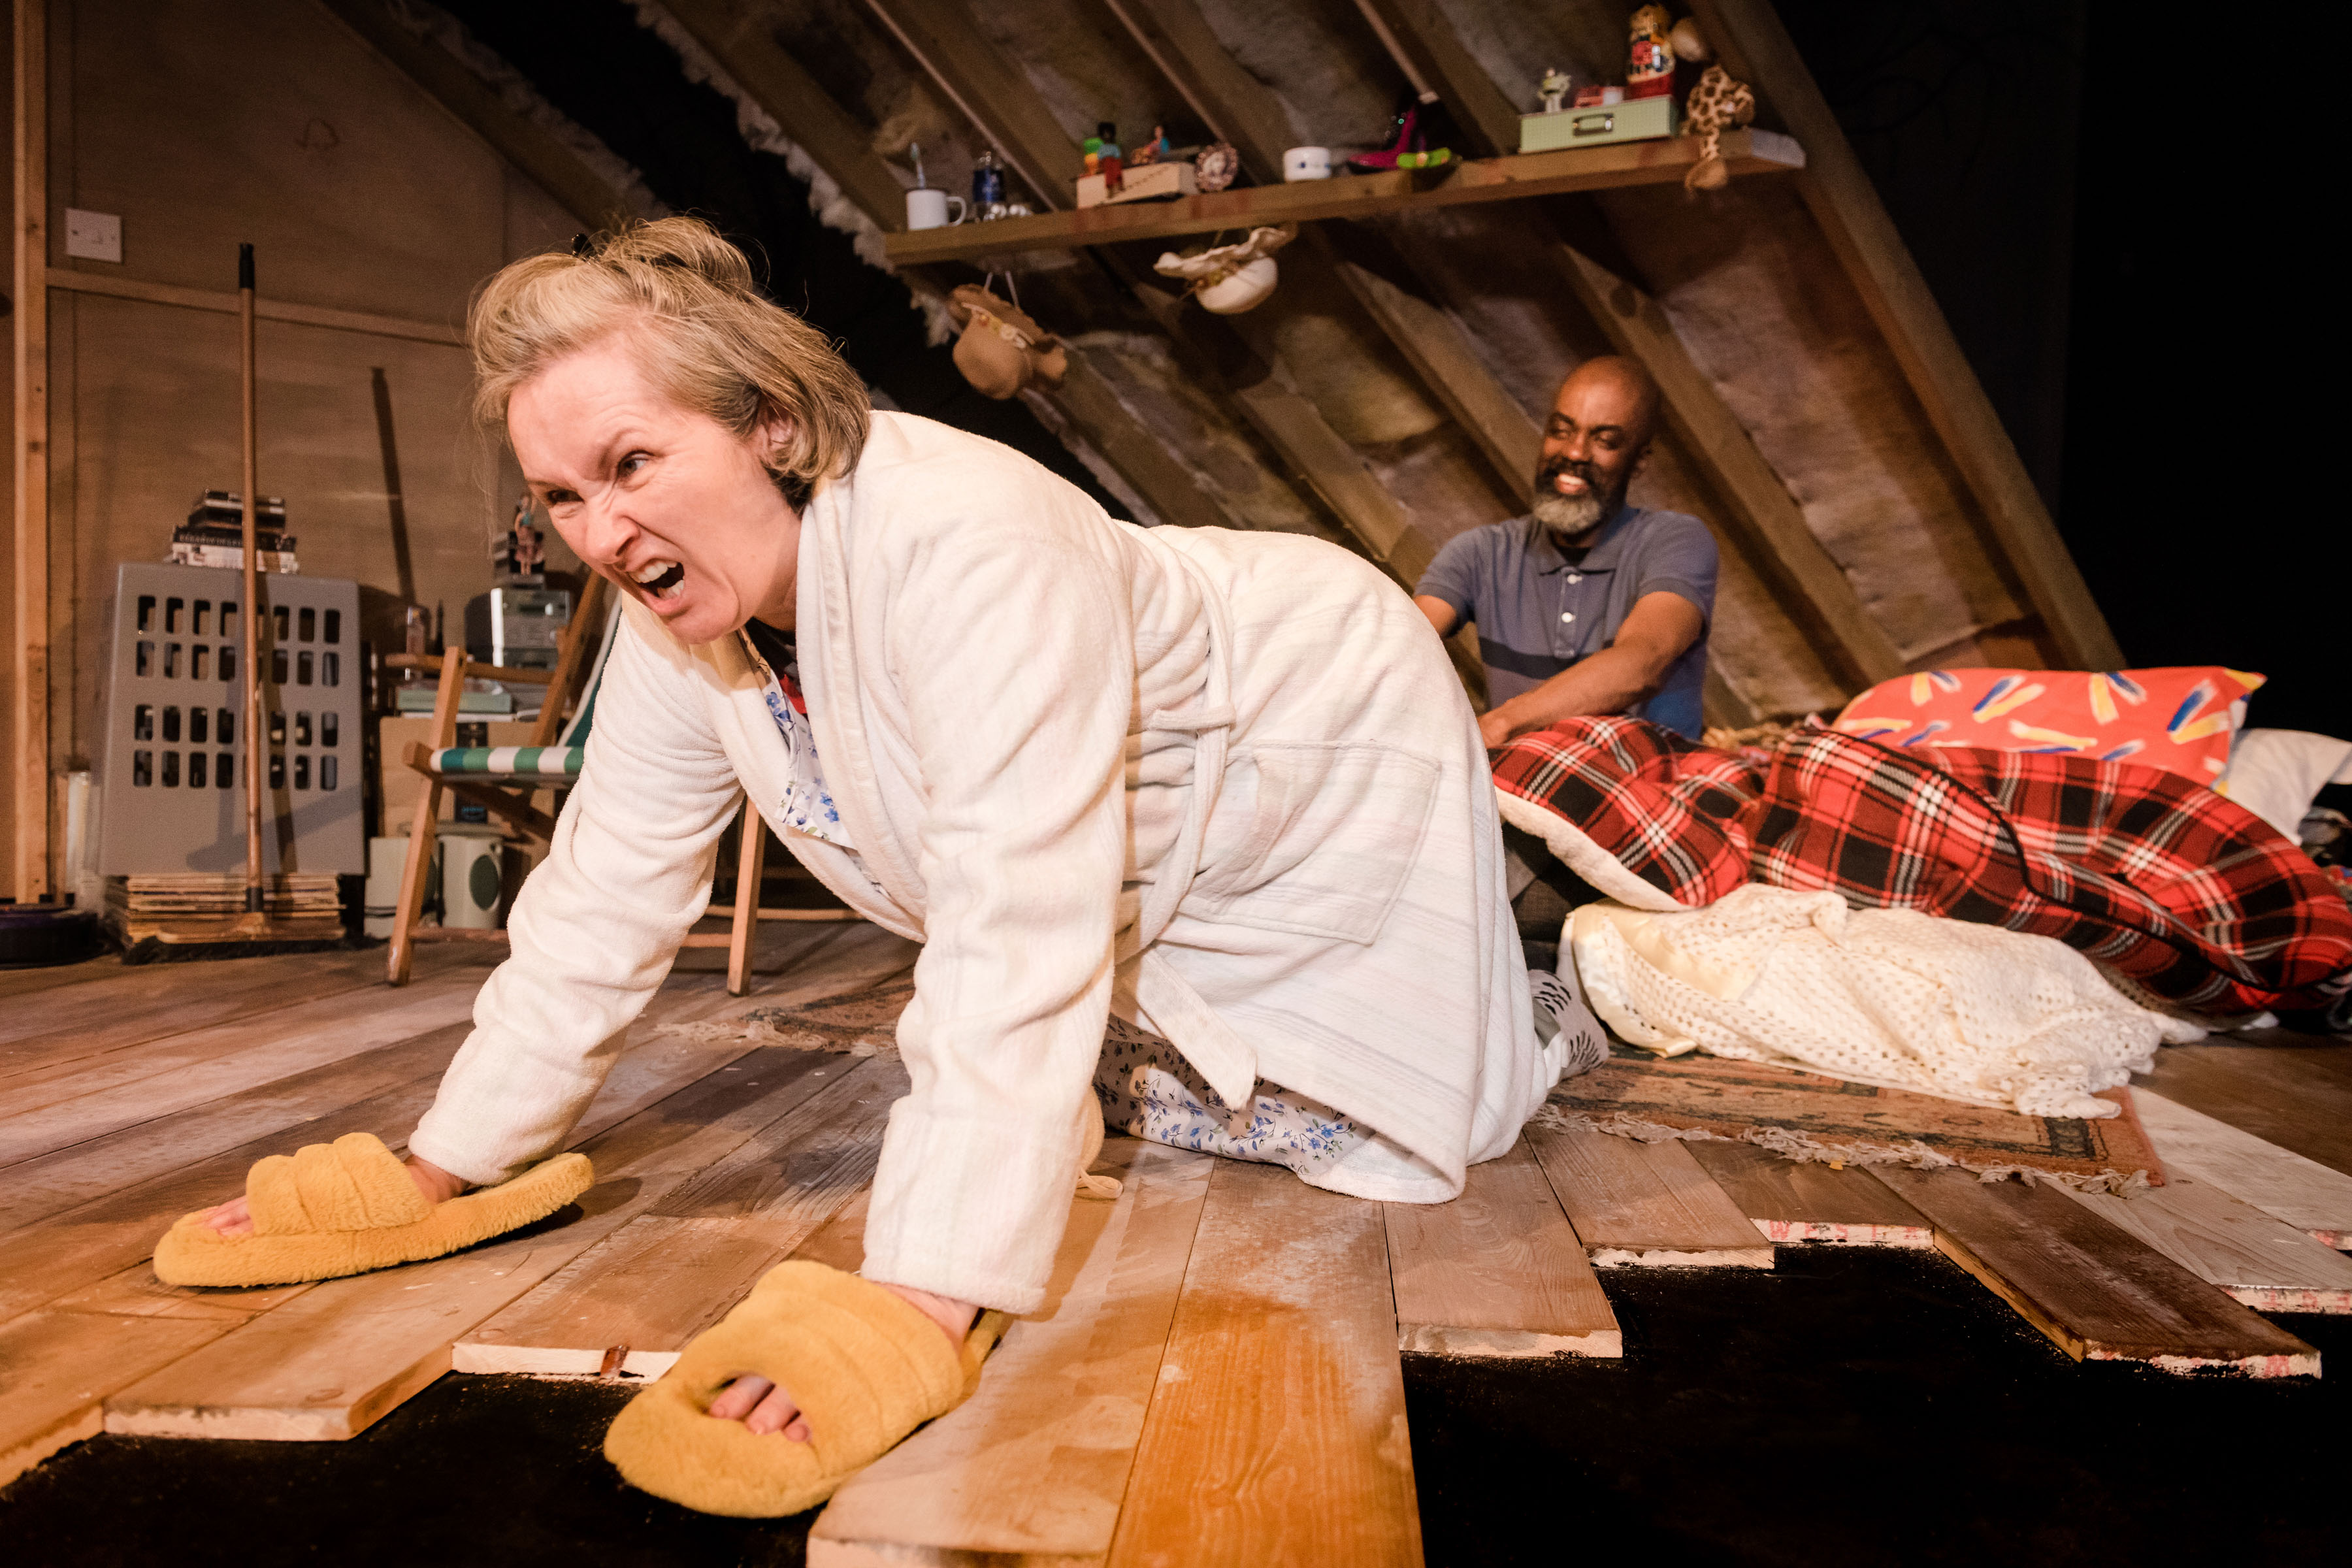 A middle aged white woman looking angrily on all fours on the floor of an attic